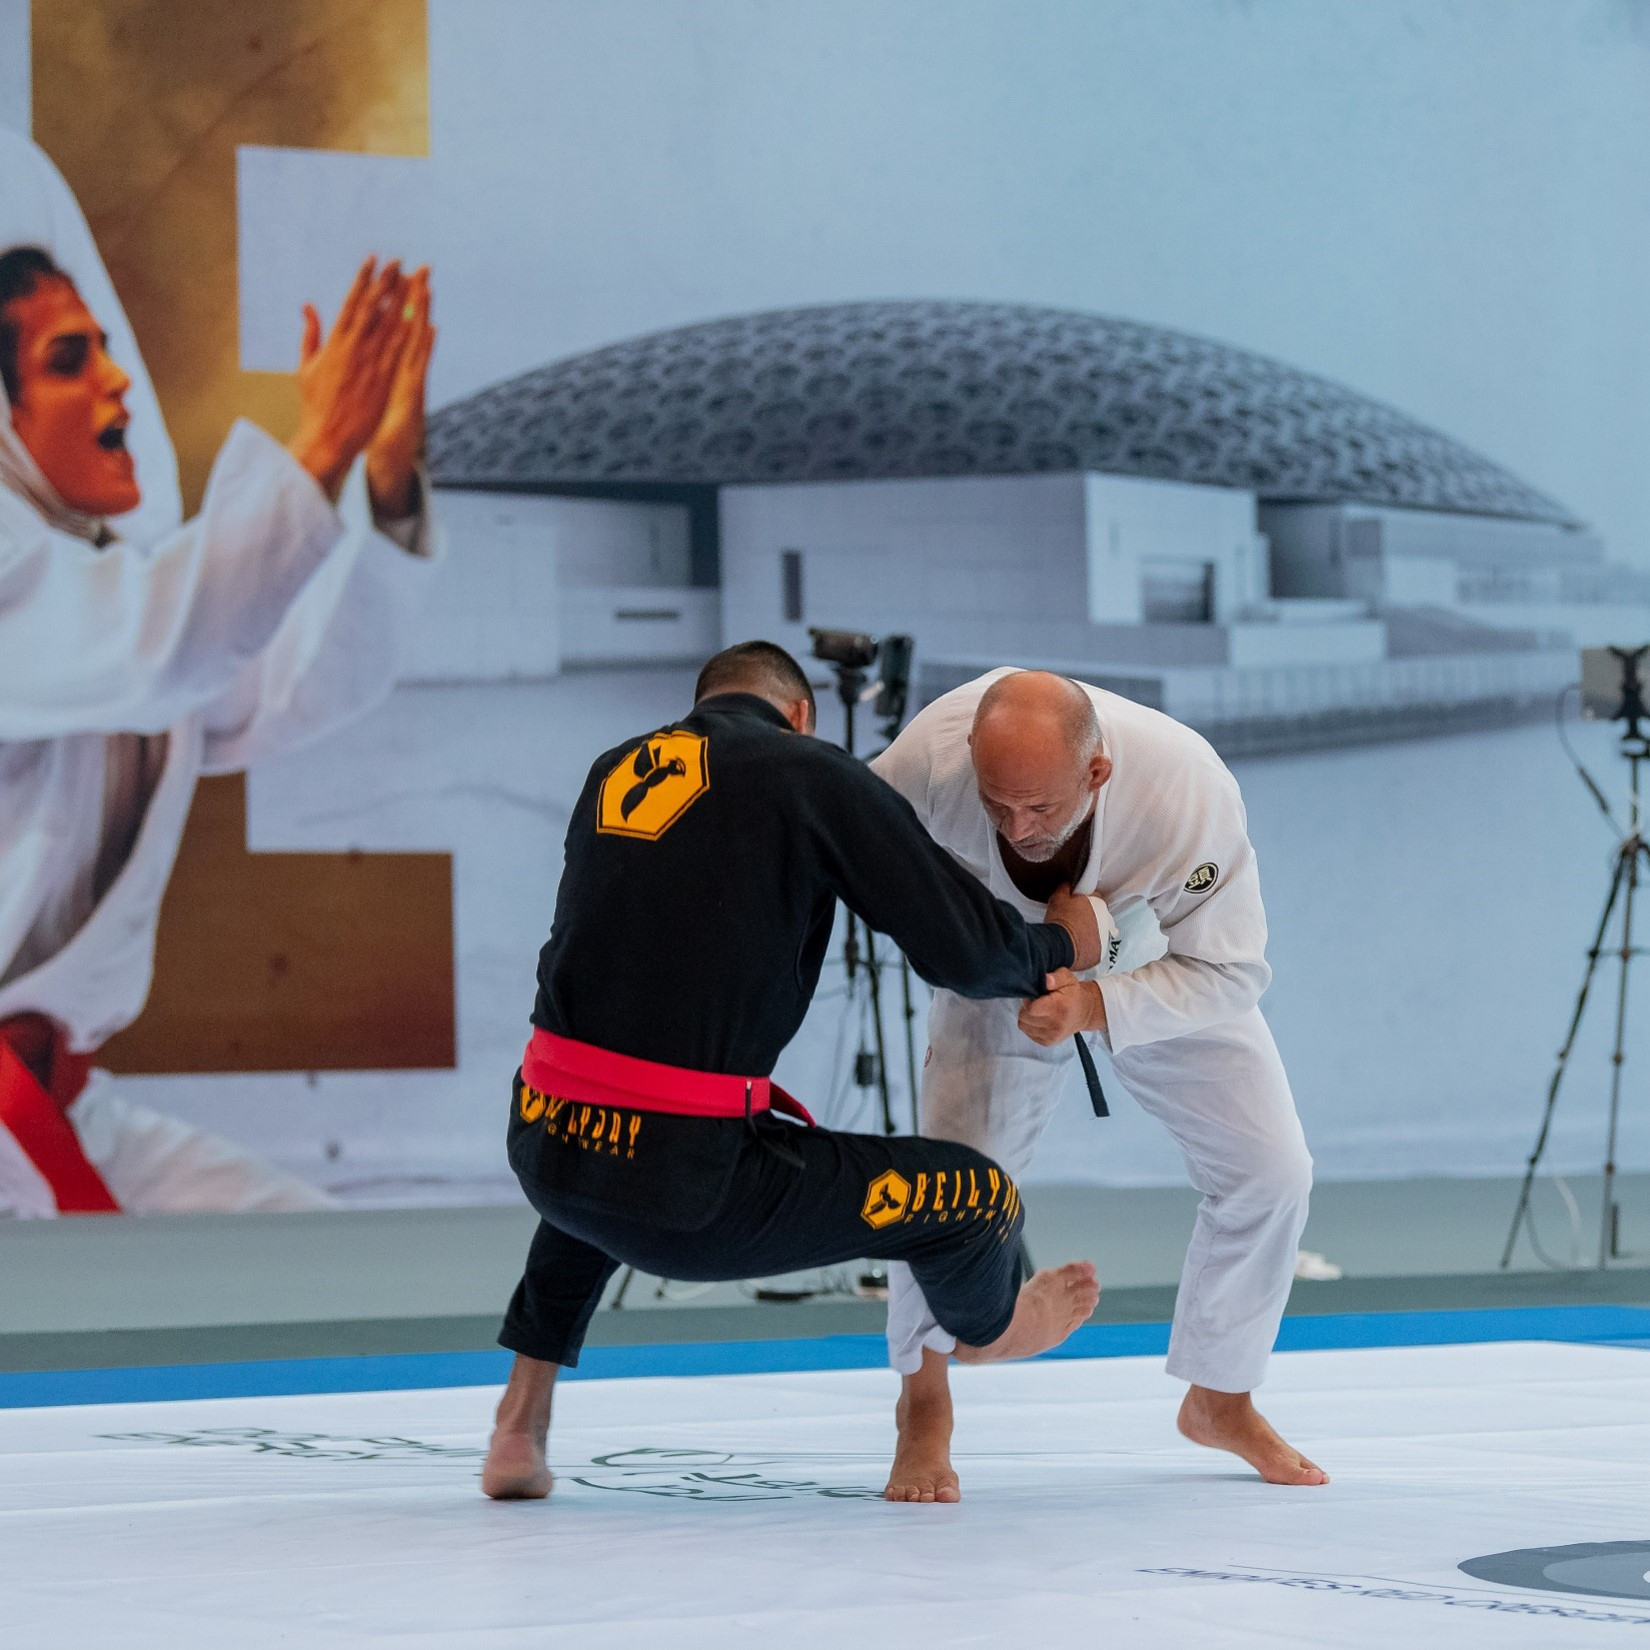 The UAE's capital city Abu Dhabi hosted the event at the Mubadala Arena in its Zayed Sports City ©UAEJJF